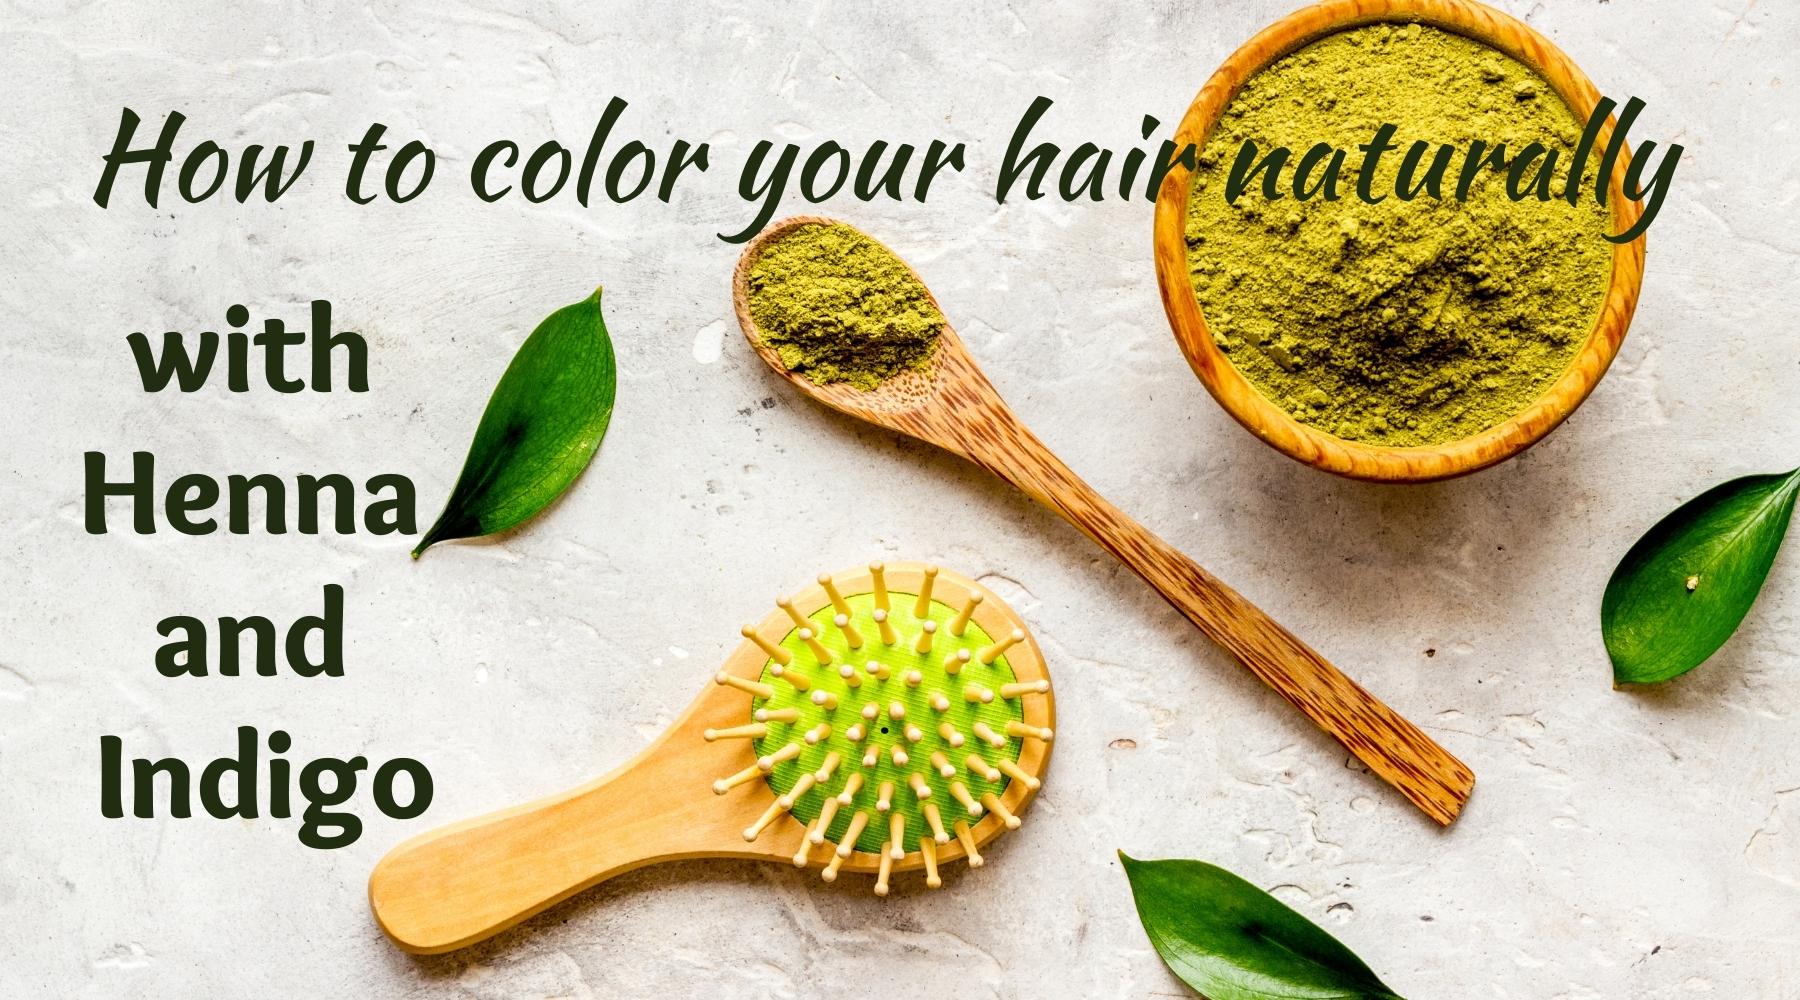 How to color your hair naturally with Henna and Indigo